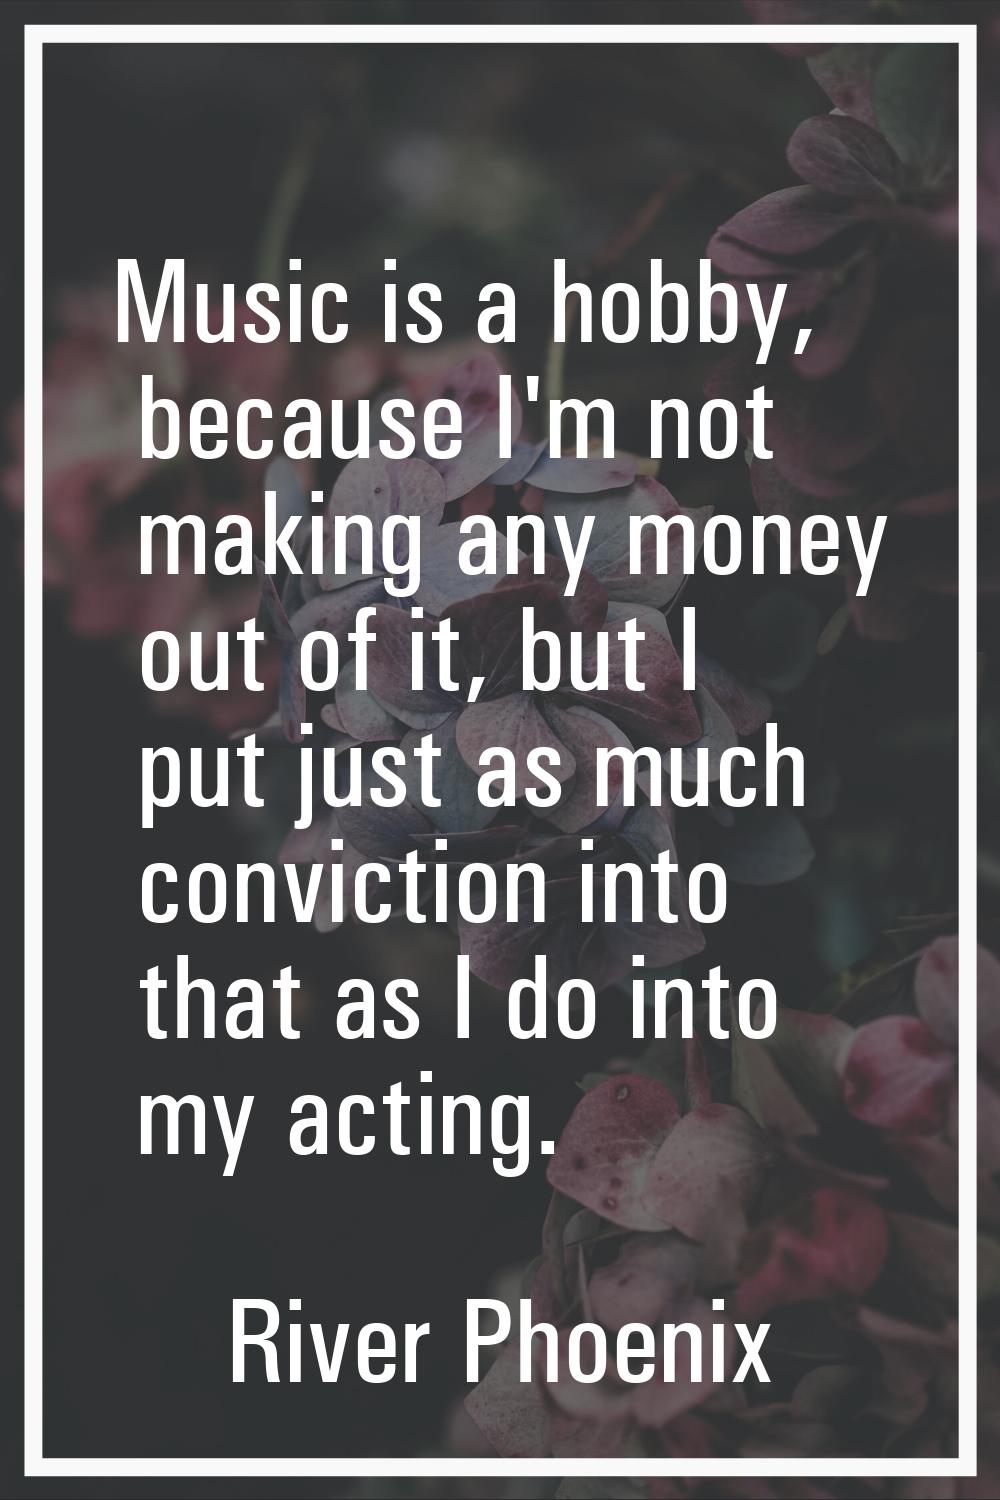 Music is a hobby, because I'm not making any money out of it, but I put just as much conviction int